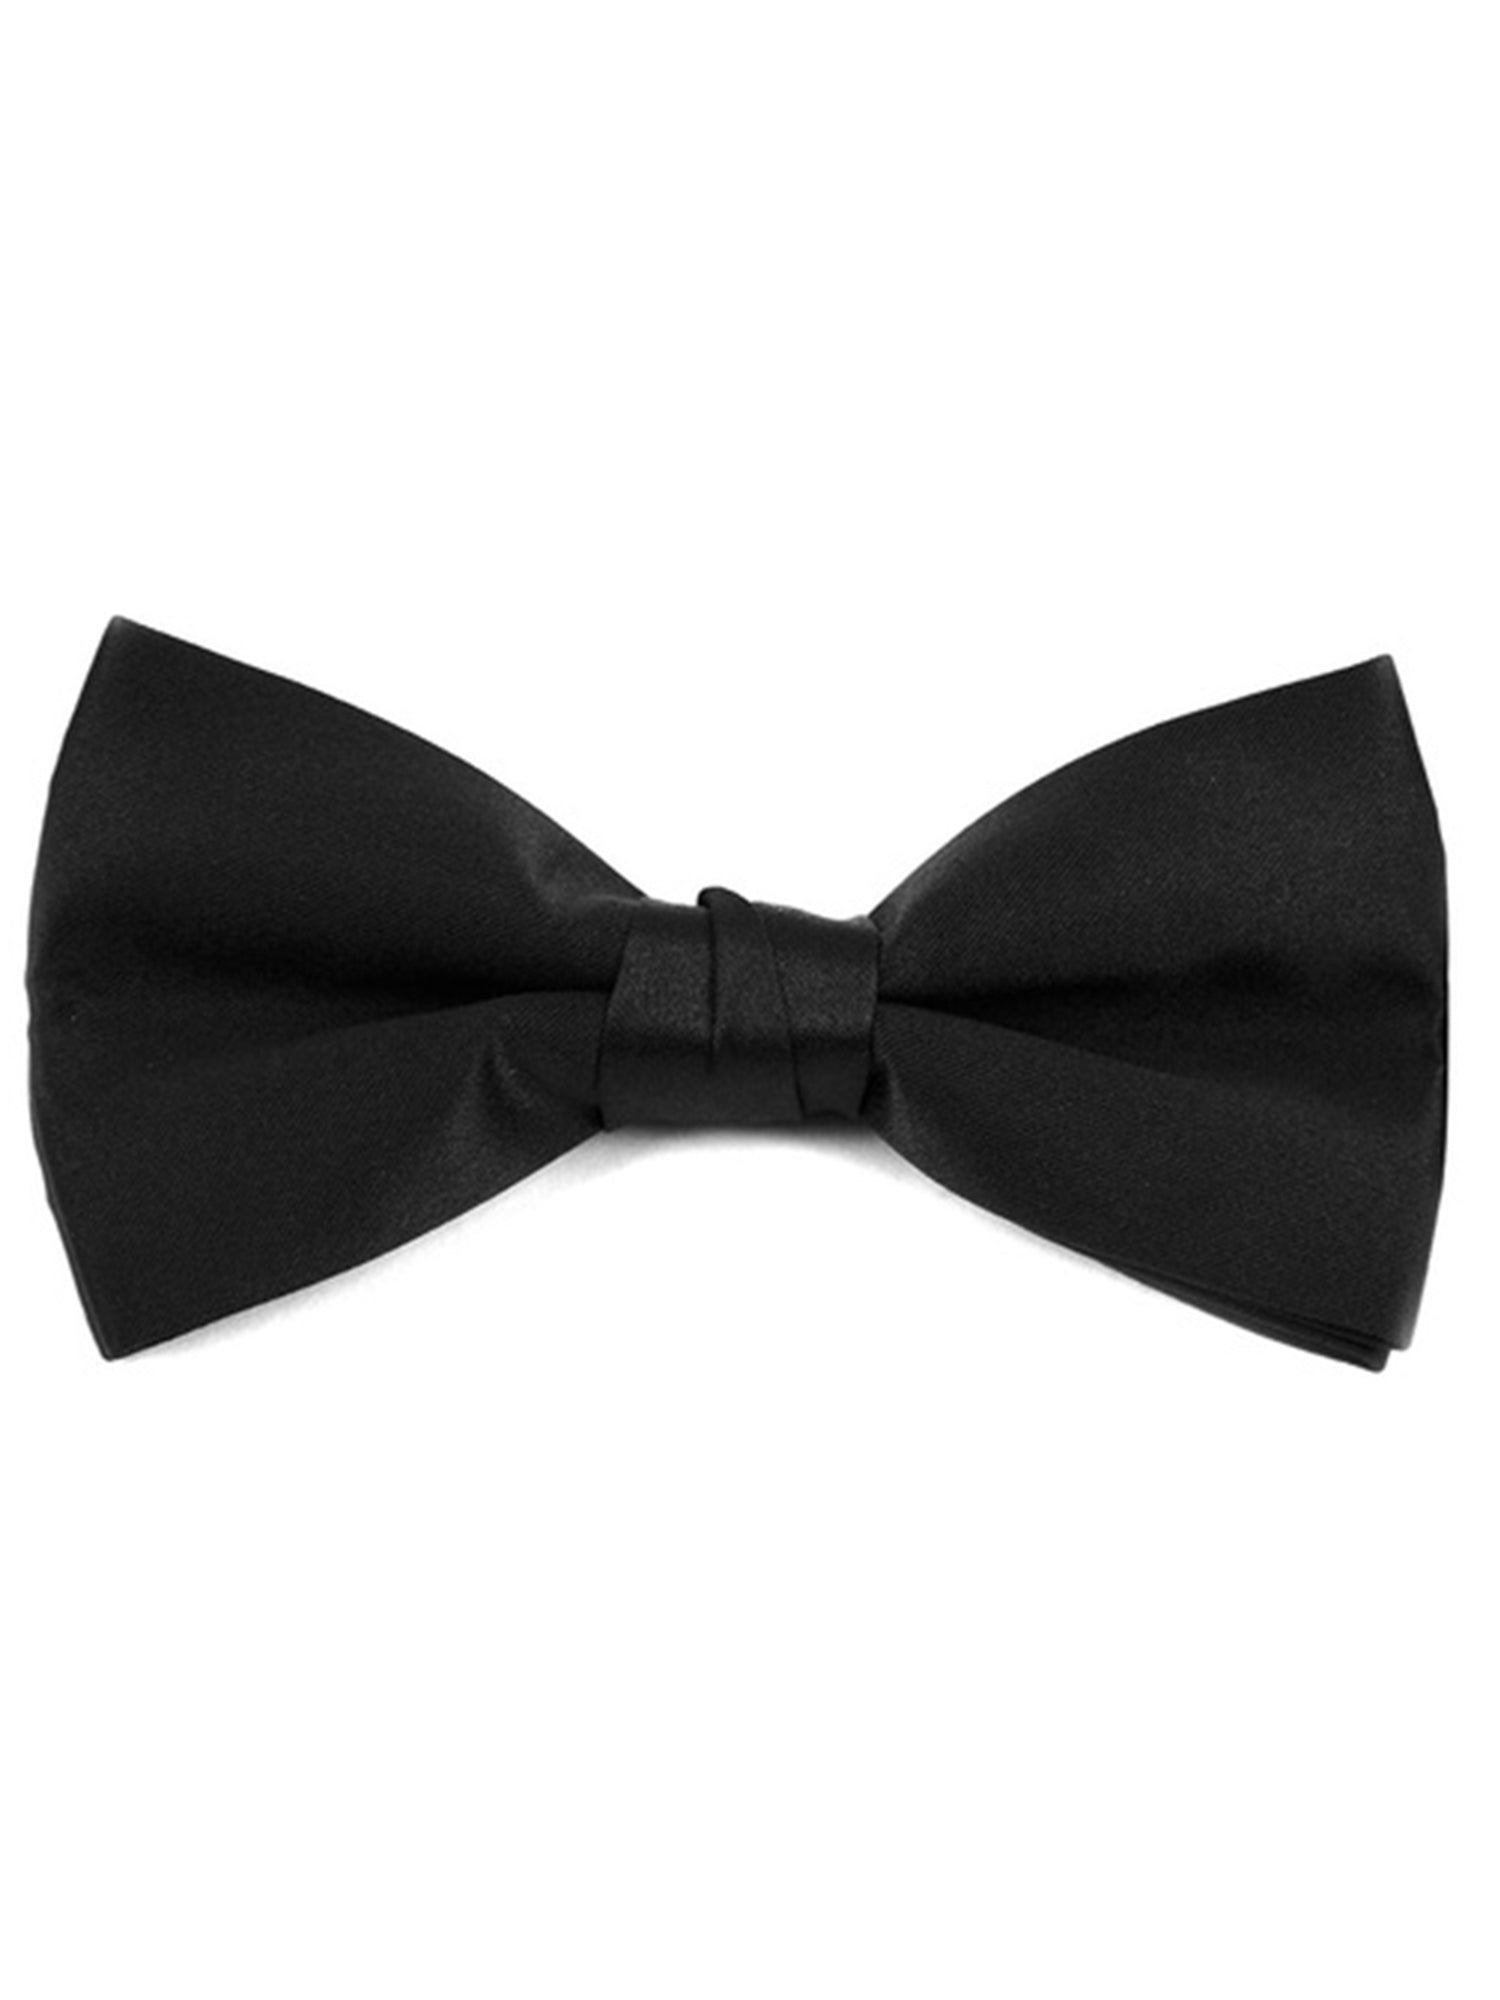 Young Boy's Pre-tied Clip On Bow Tie - Formal Tuxedo Solid Color Boy's Solid Color Bow Tie TheDapperTie Black One Size 